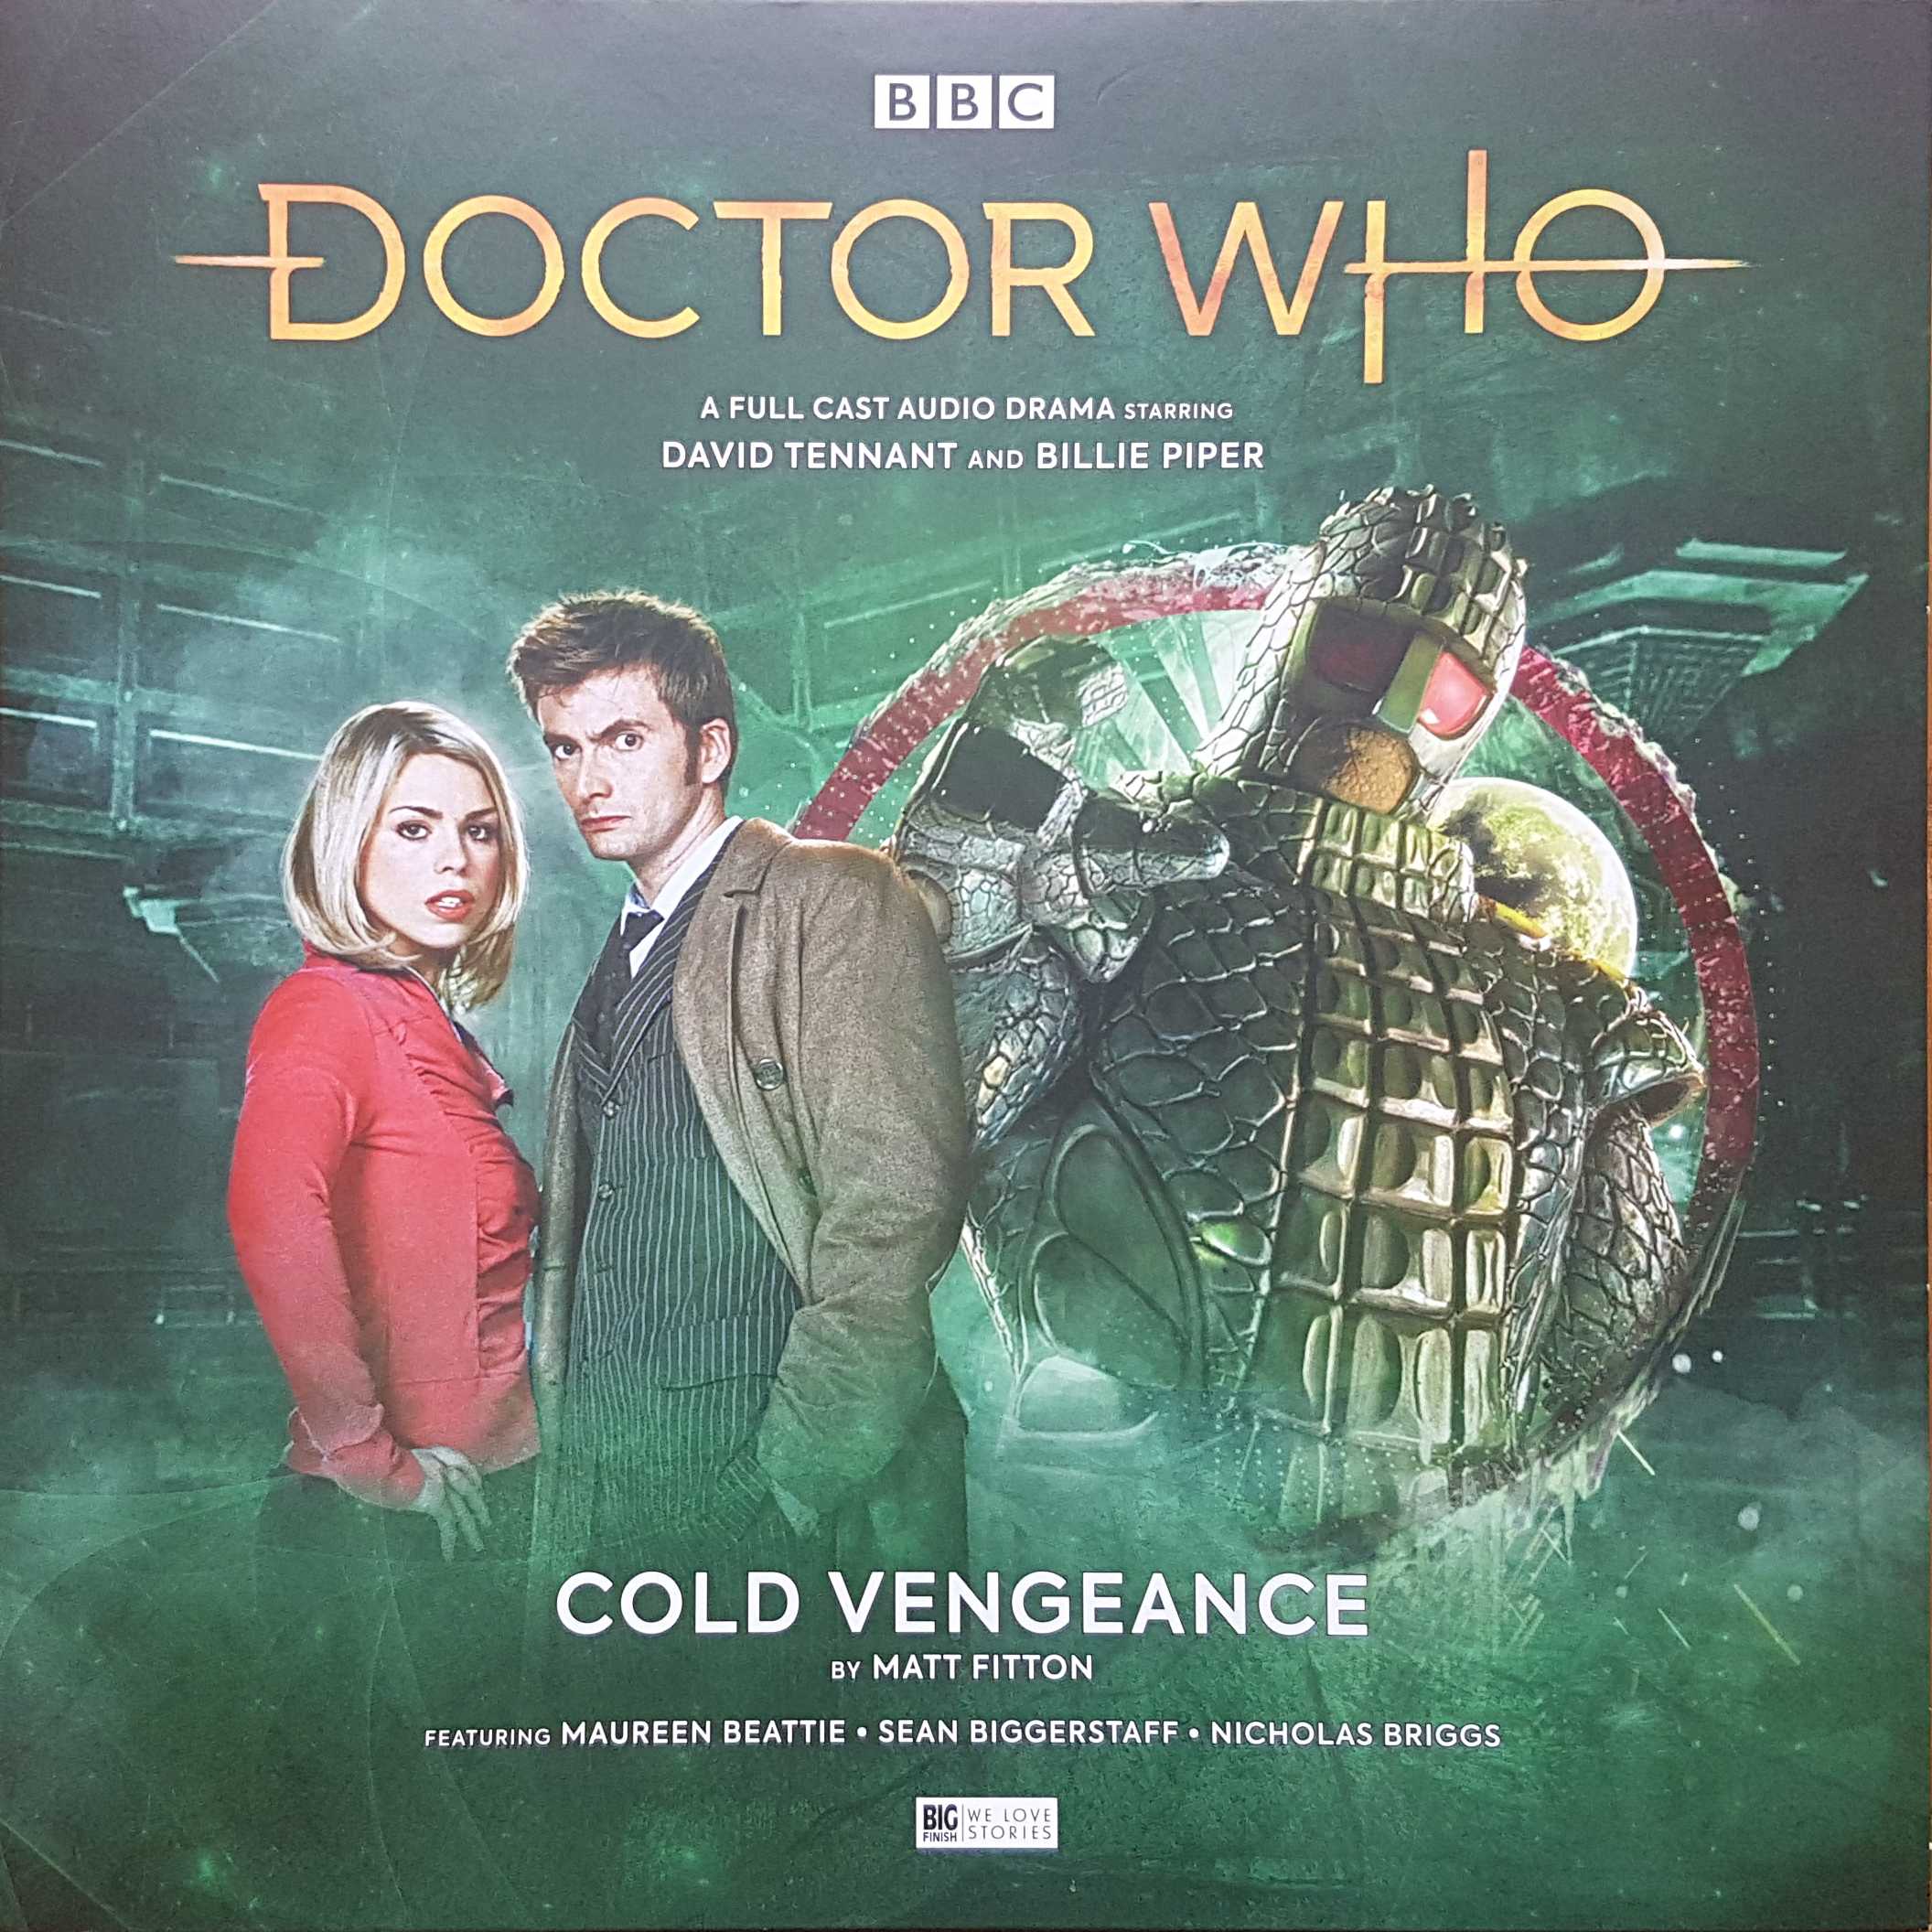 Picture of DEMREC 327 Doctor Who - Cold Vengeance by artist Matt Fitton from the BBC records and Tapes library